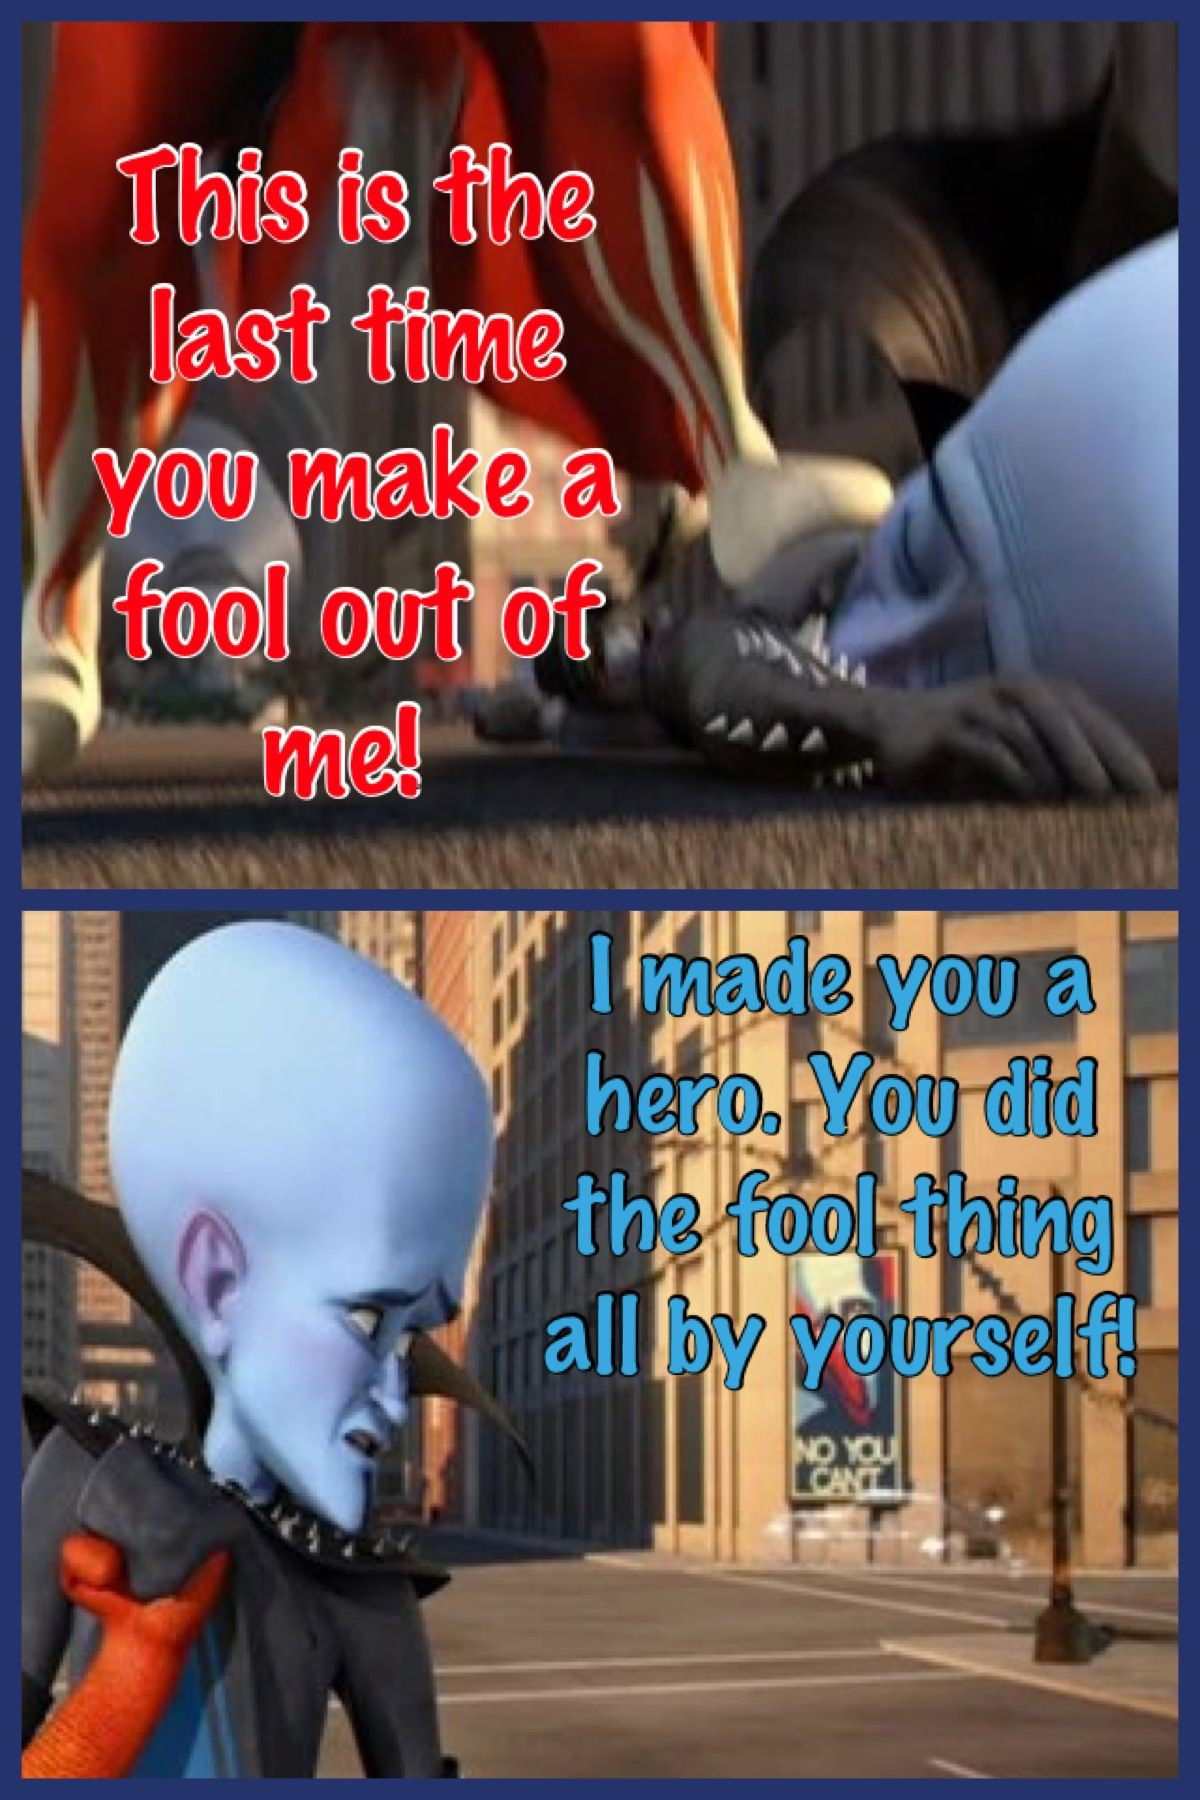 Best Kids Movie Quotes
 Megamind e of the best kids movies ever